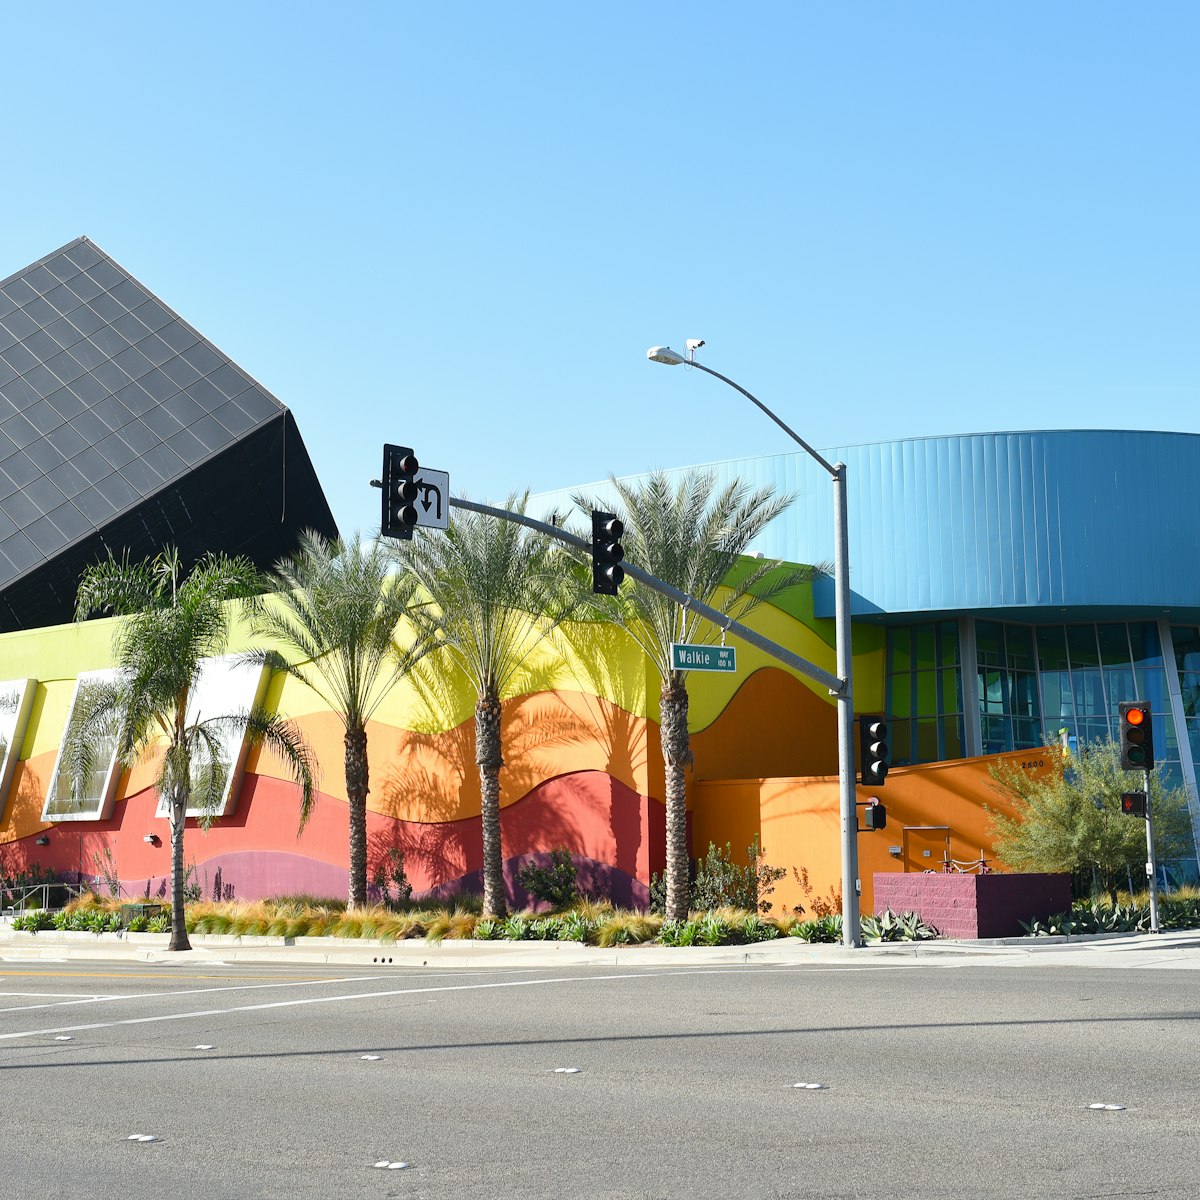 Discovery Cube Orange County, a science museum in Santa Ana, California, with more than 100 hands-on exhibits.